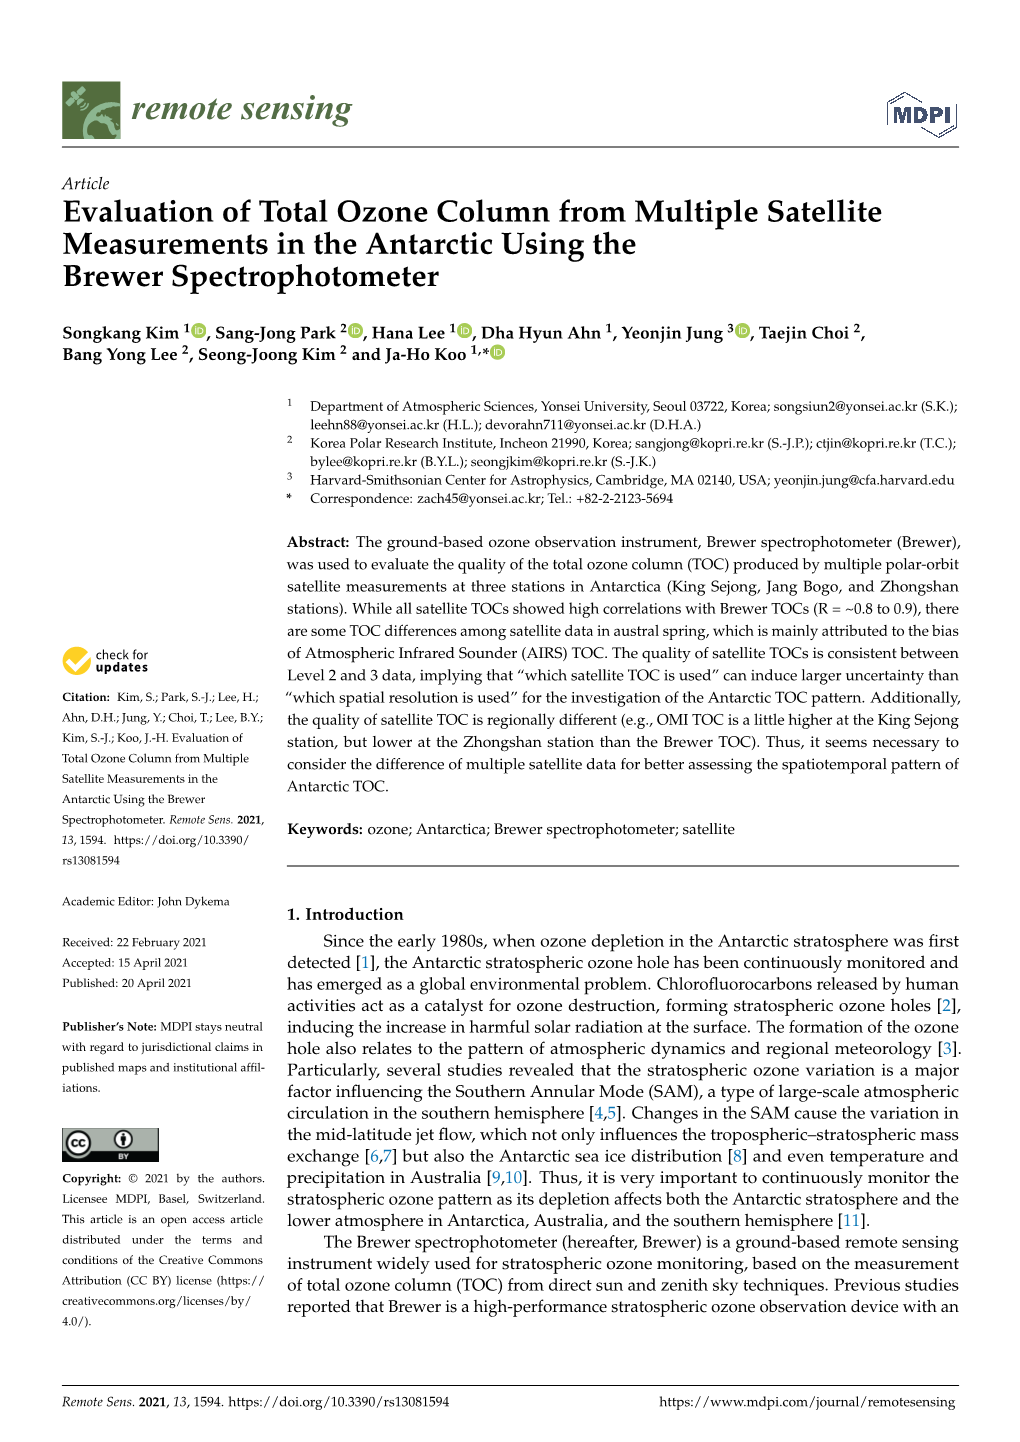 Evaluation of Total Ozone Column from Multiple Satellite Measurements in the Antarctic Using the Brewer Spectrophotometer